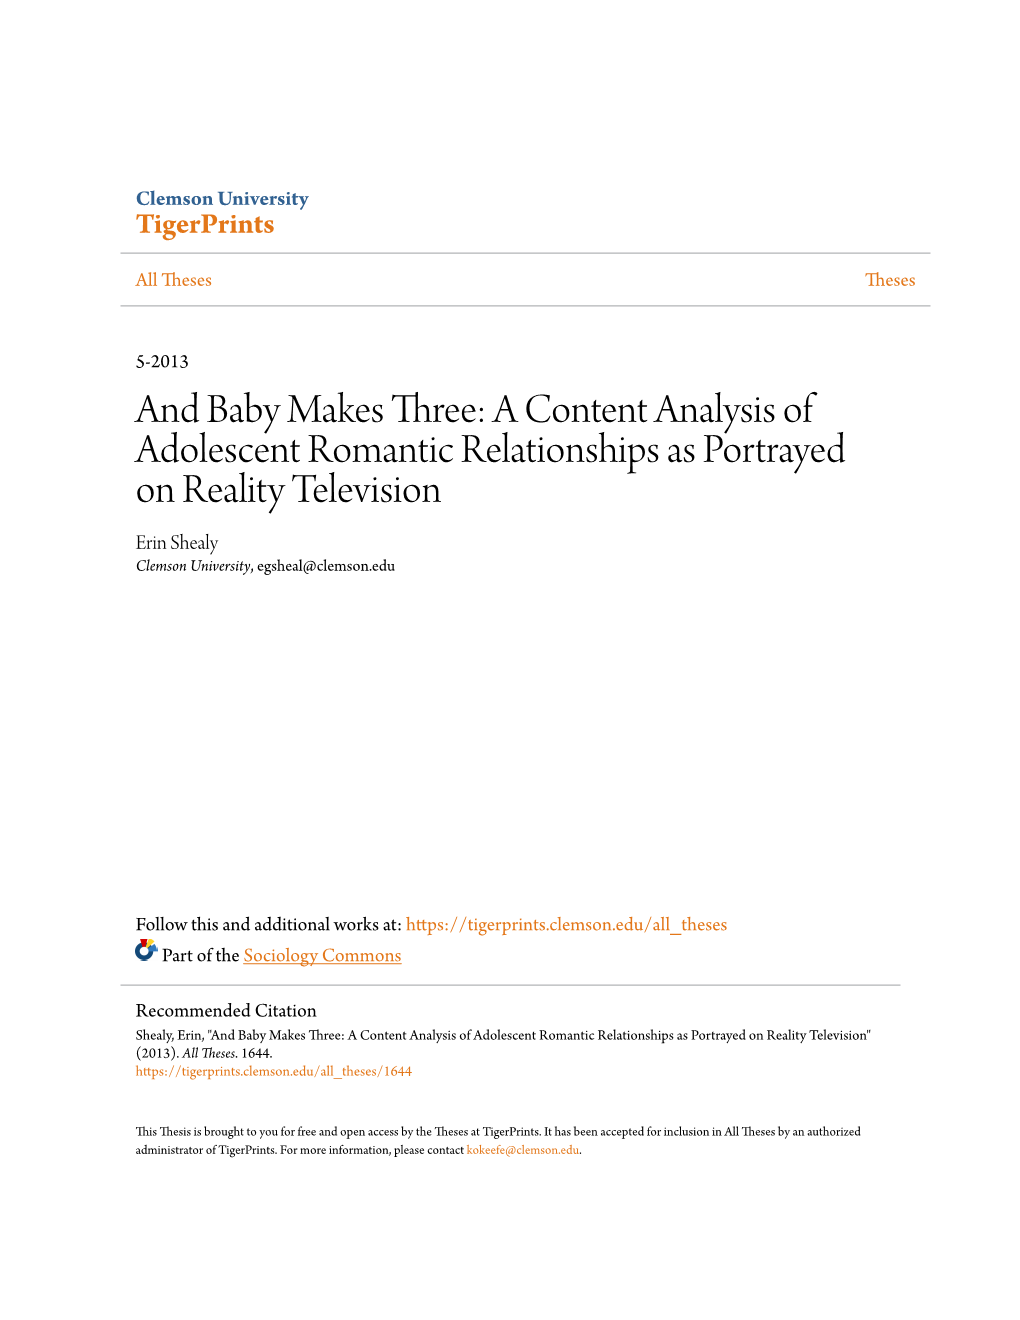 A Content Analysis of Adolescent Romantic Relationships As Portrayed on Reality Television Erin Shealy Clemson University, Egsheal@Clemson.Edu